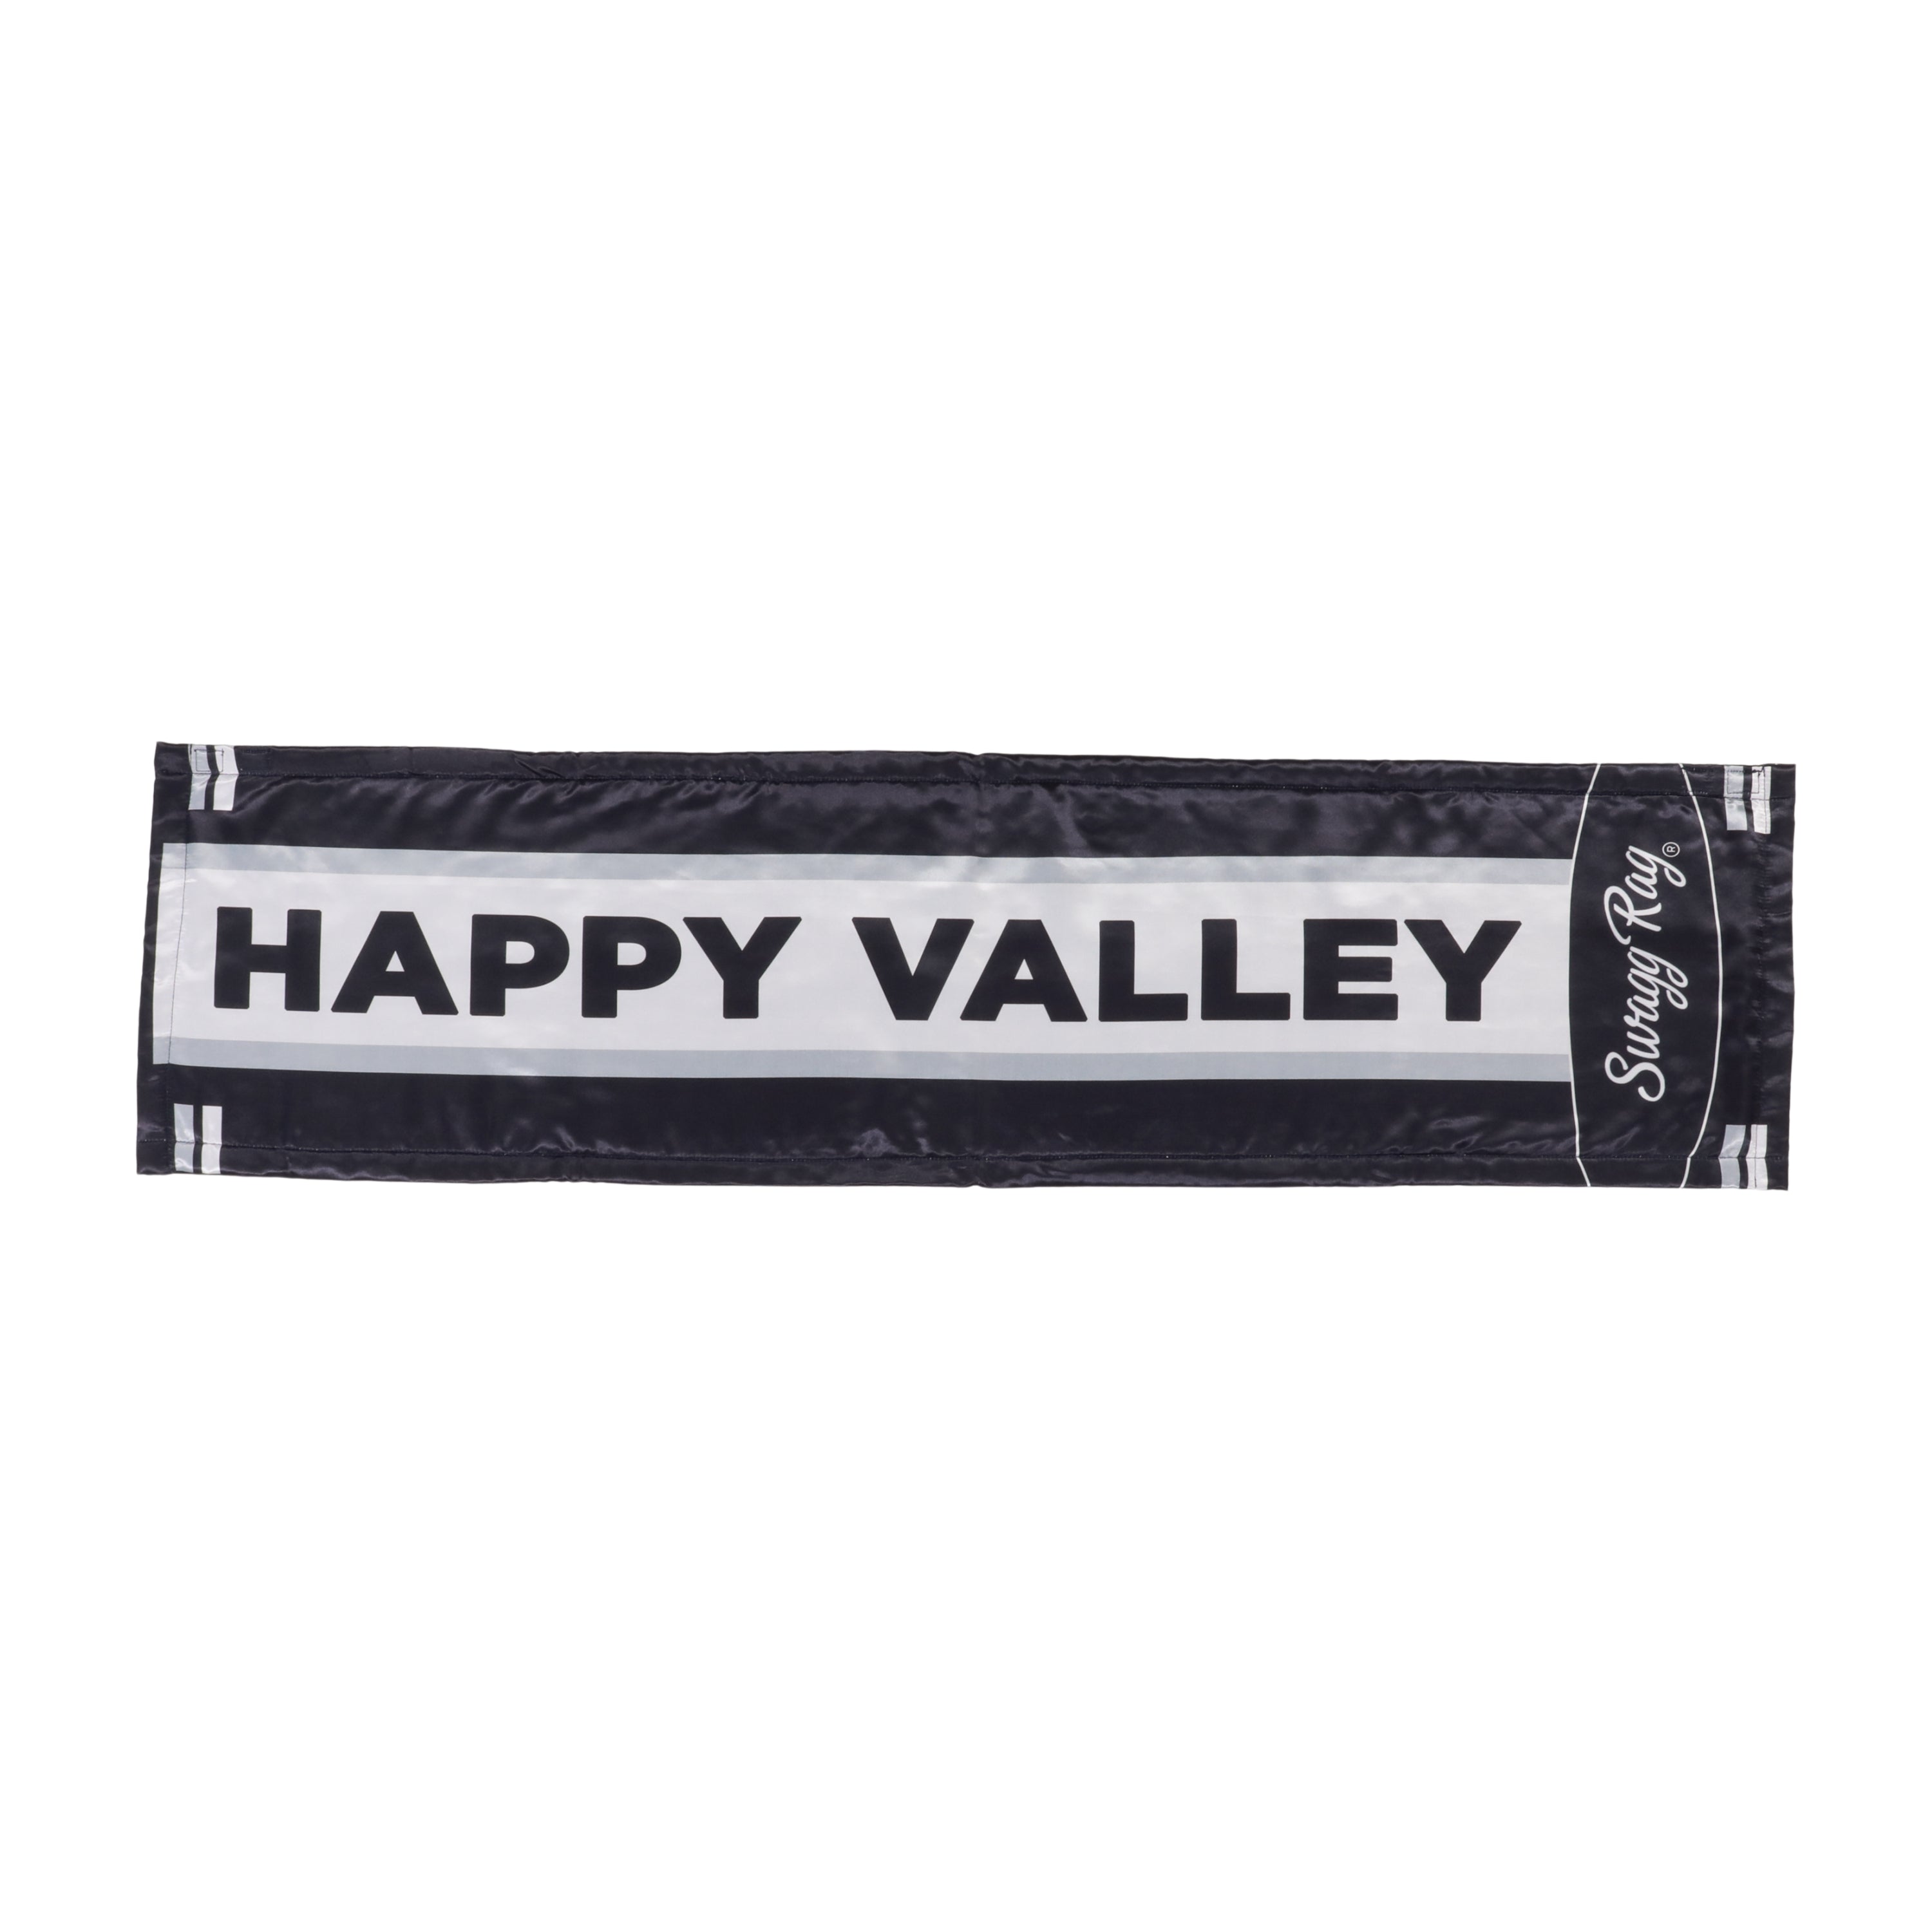 The Valley Swagg Rag